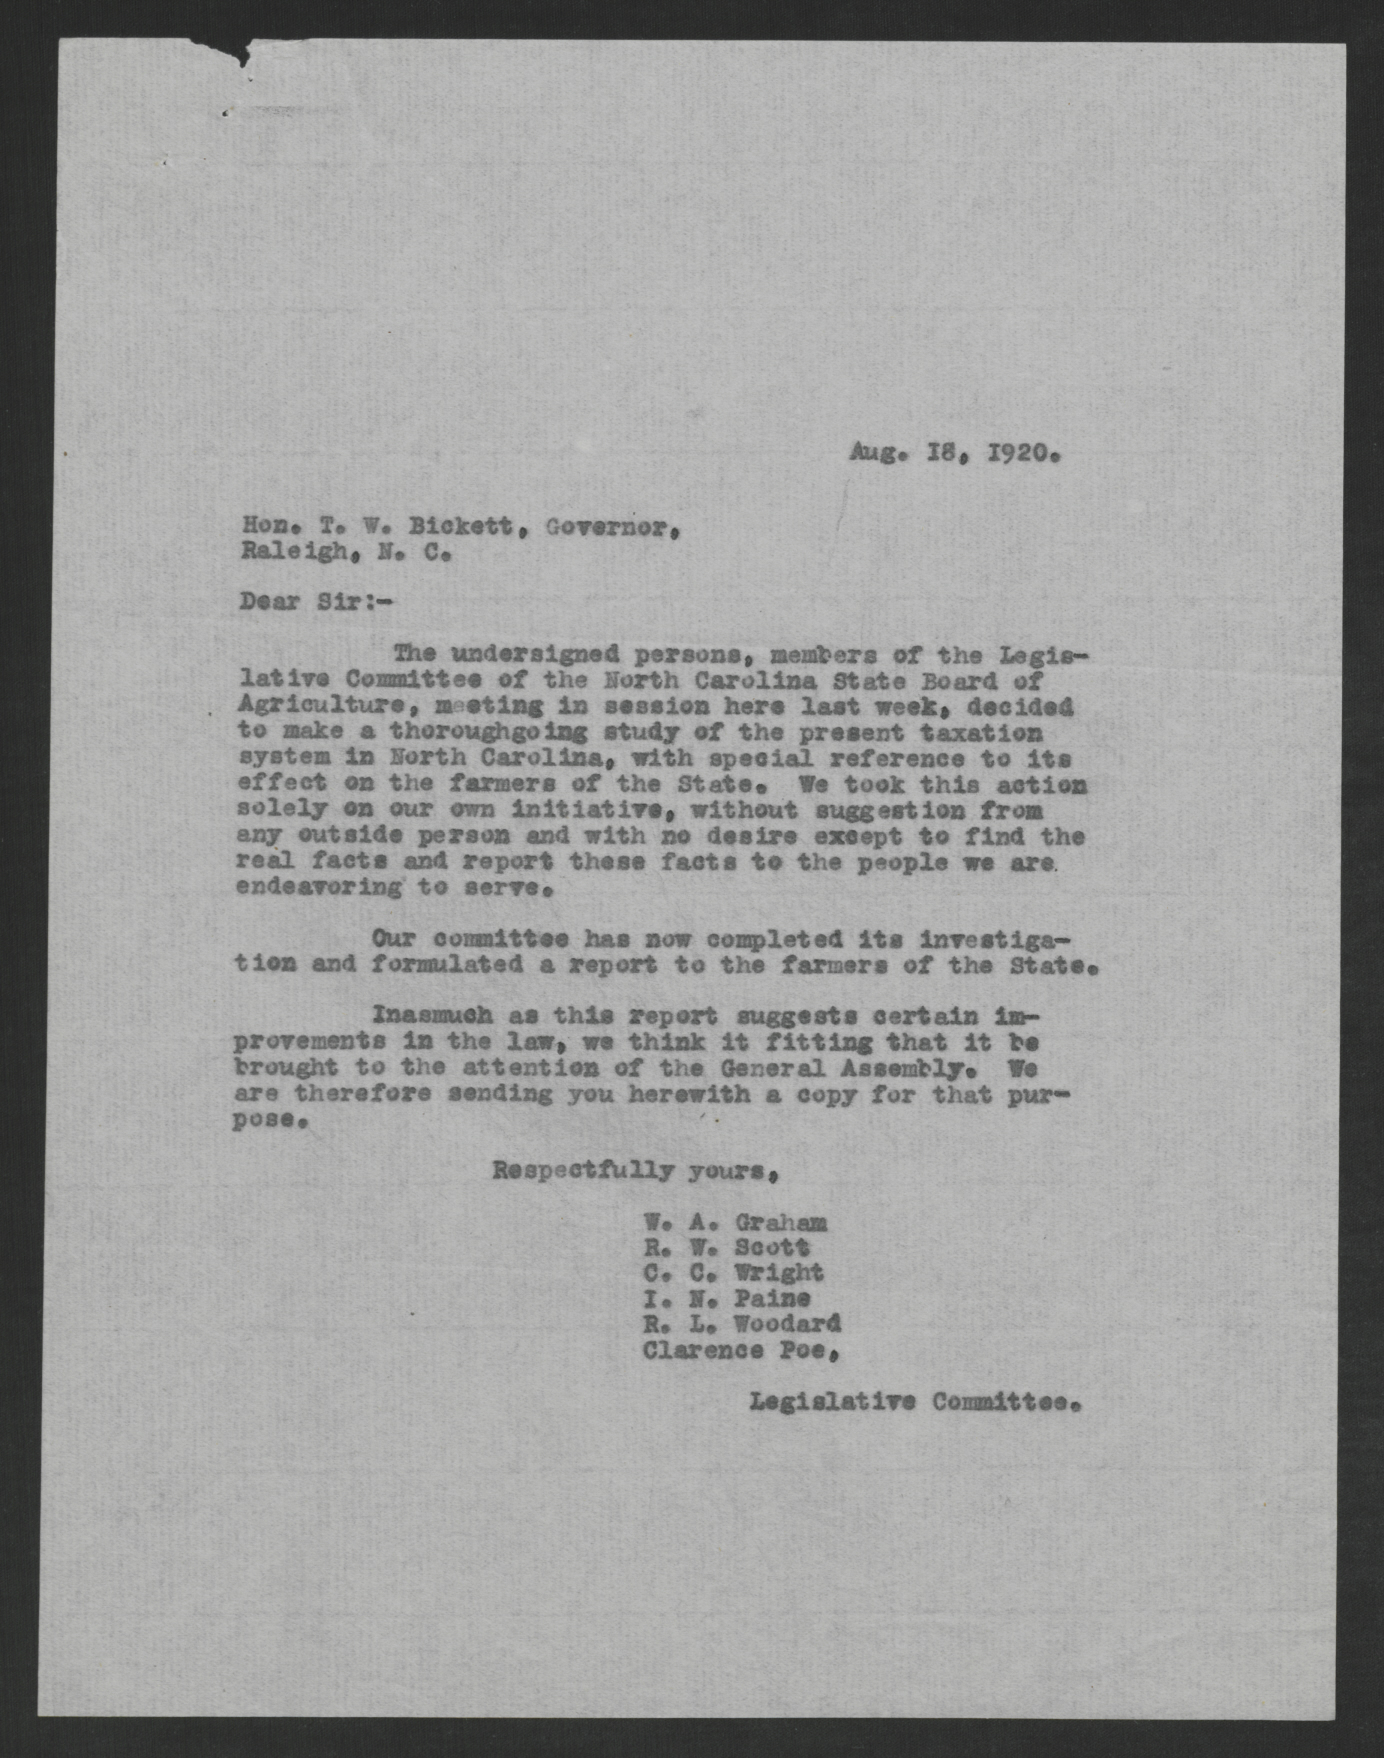 Letter from William A. Graham and others to Thomas W. Bickett, August 18, 1920